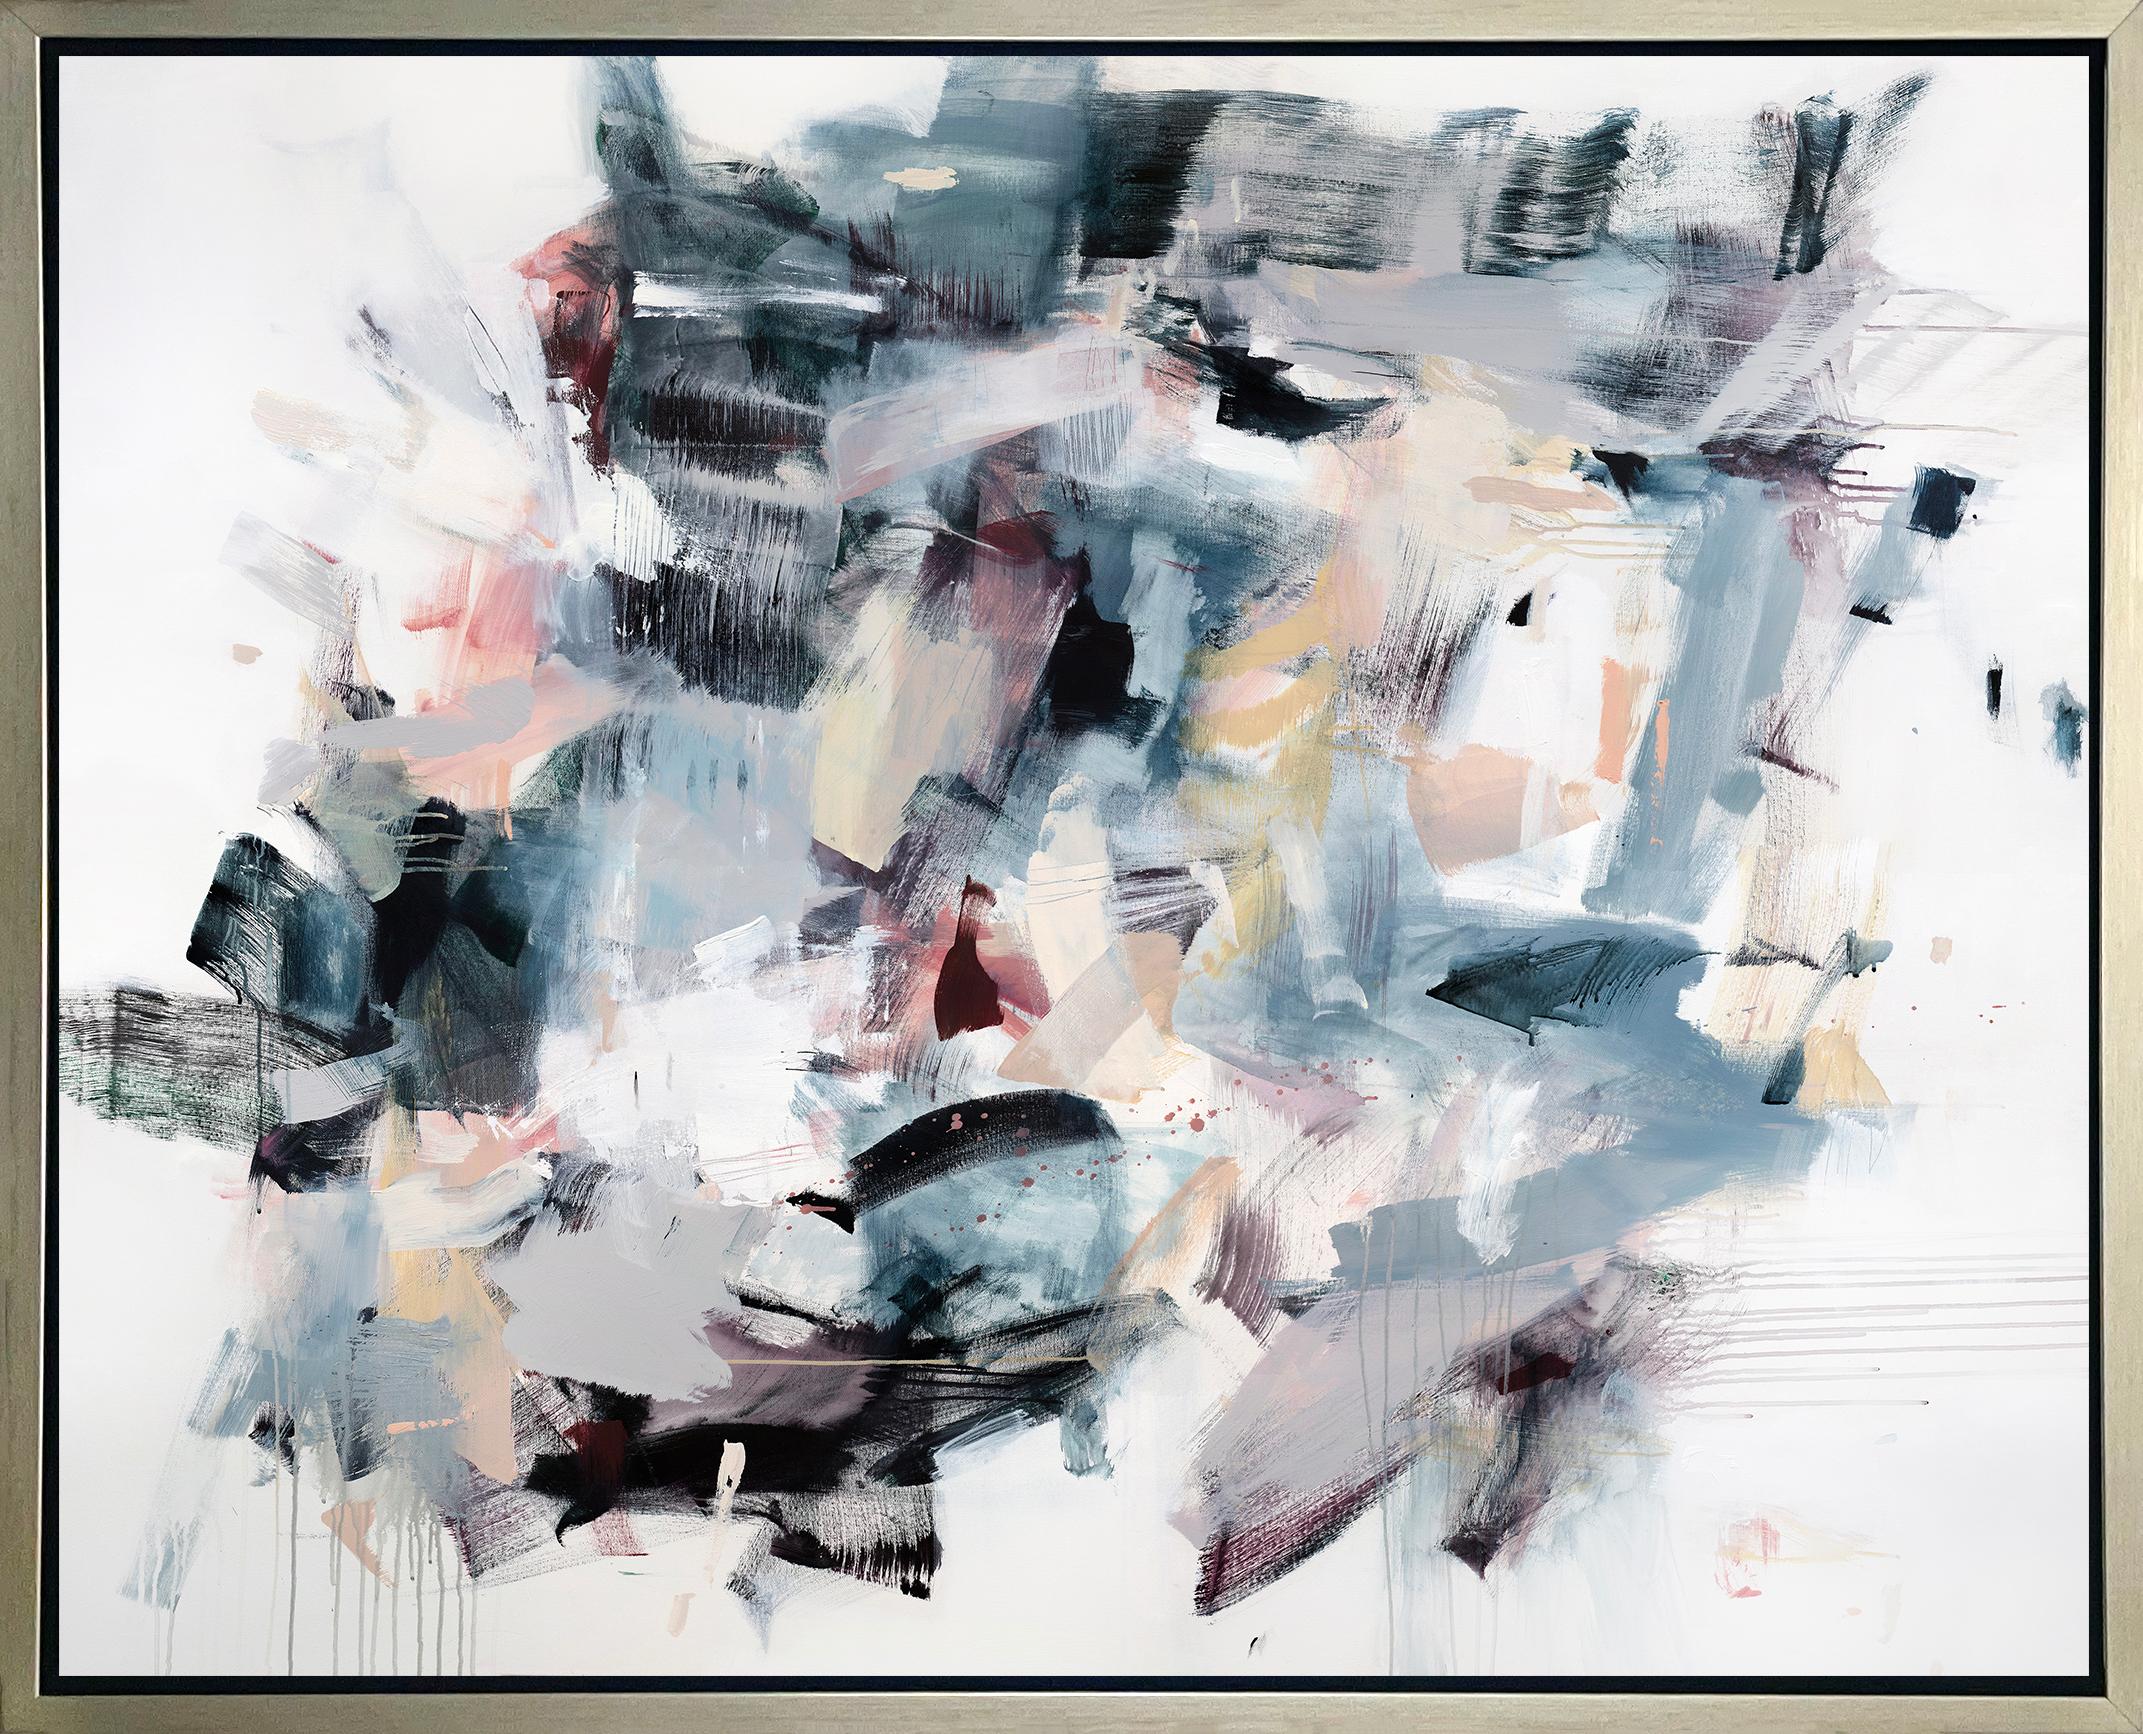 Kelly Rossetti Abstract Print - "Serotonin Overflow, " Framed Limited Edition Giclee Print, 24" x 30"